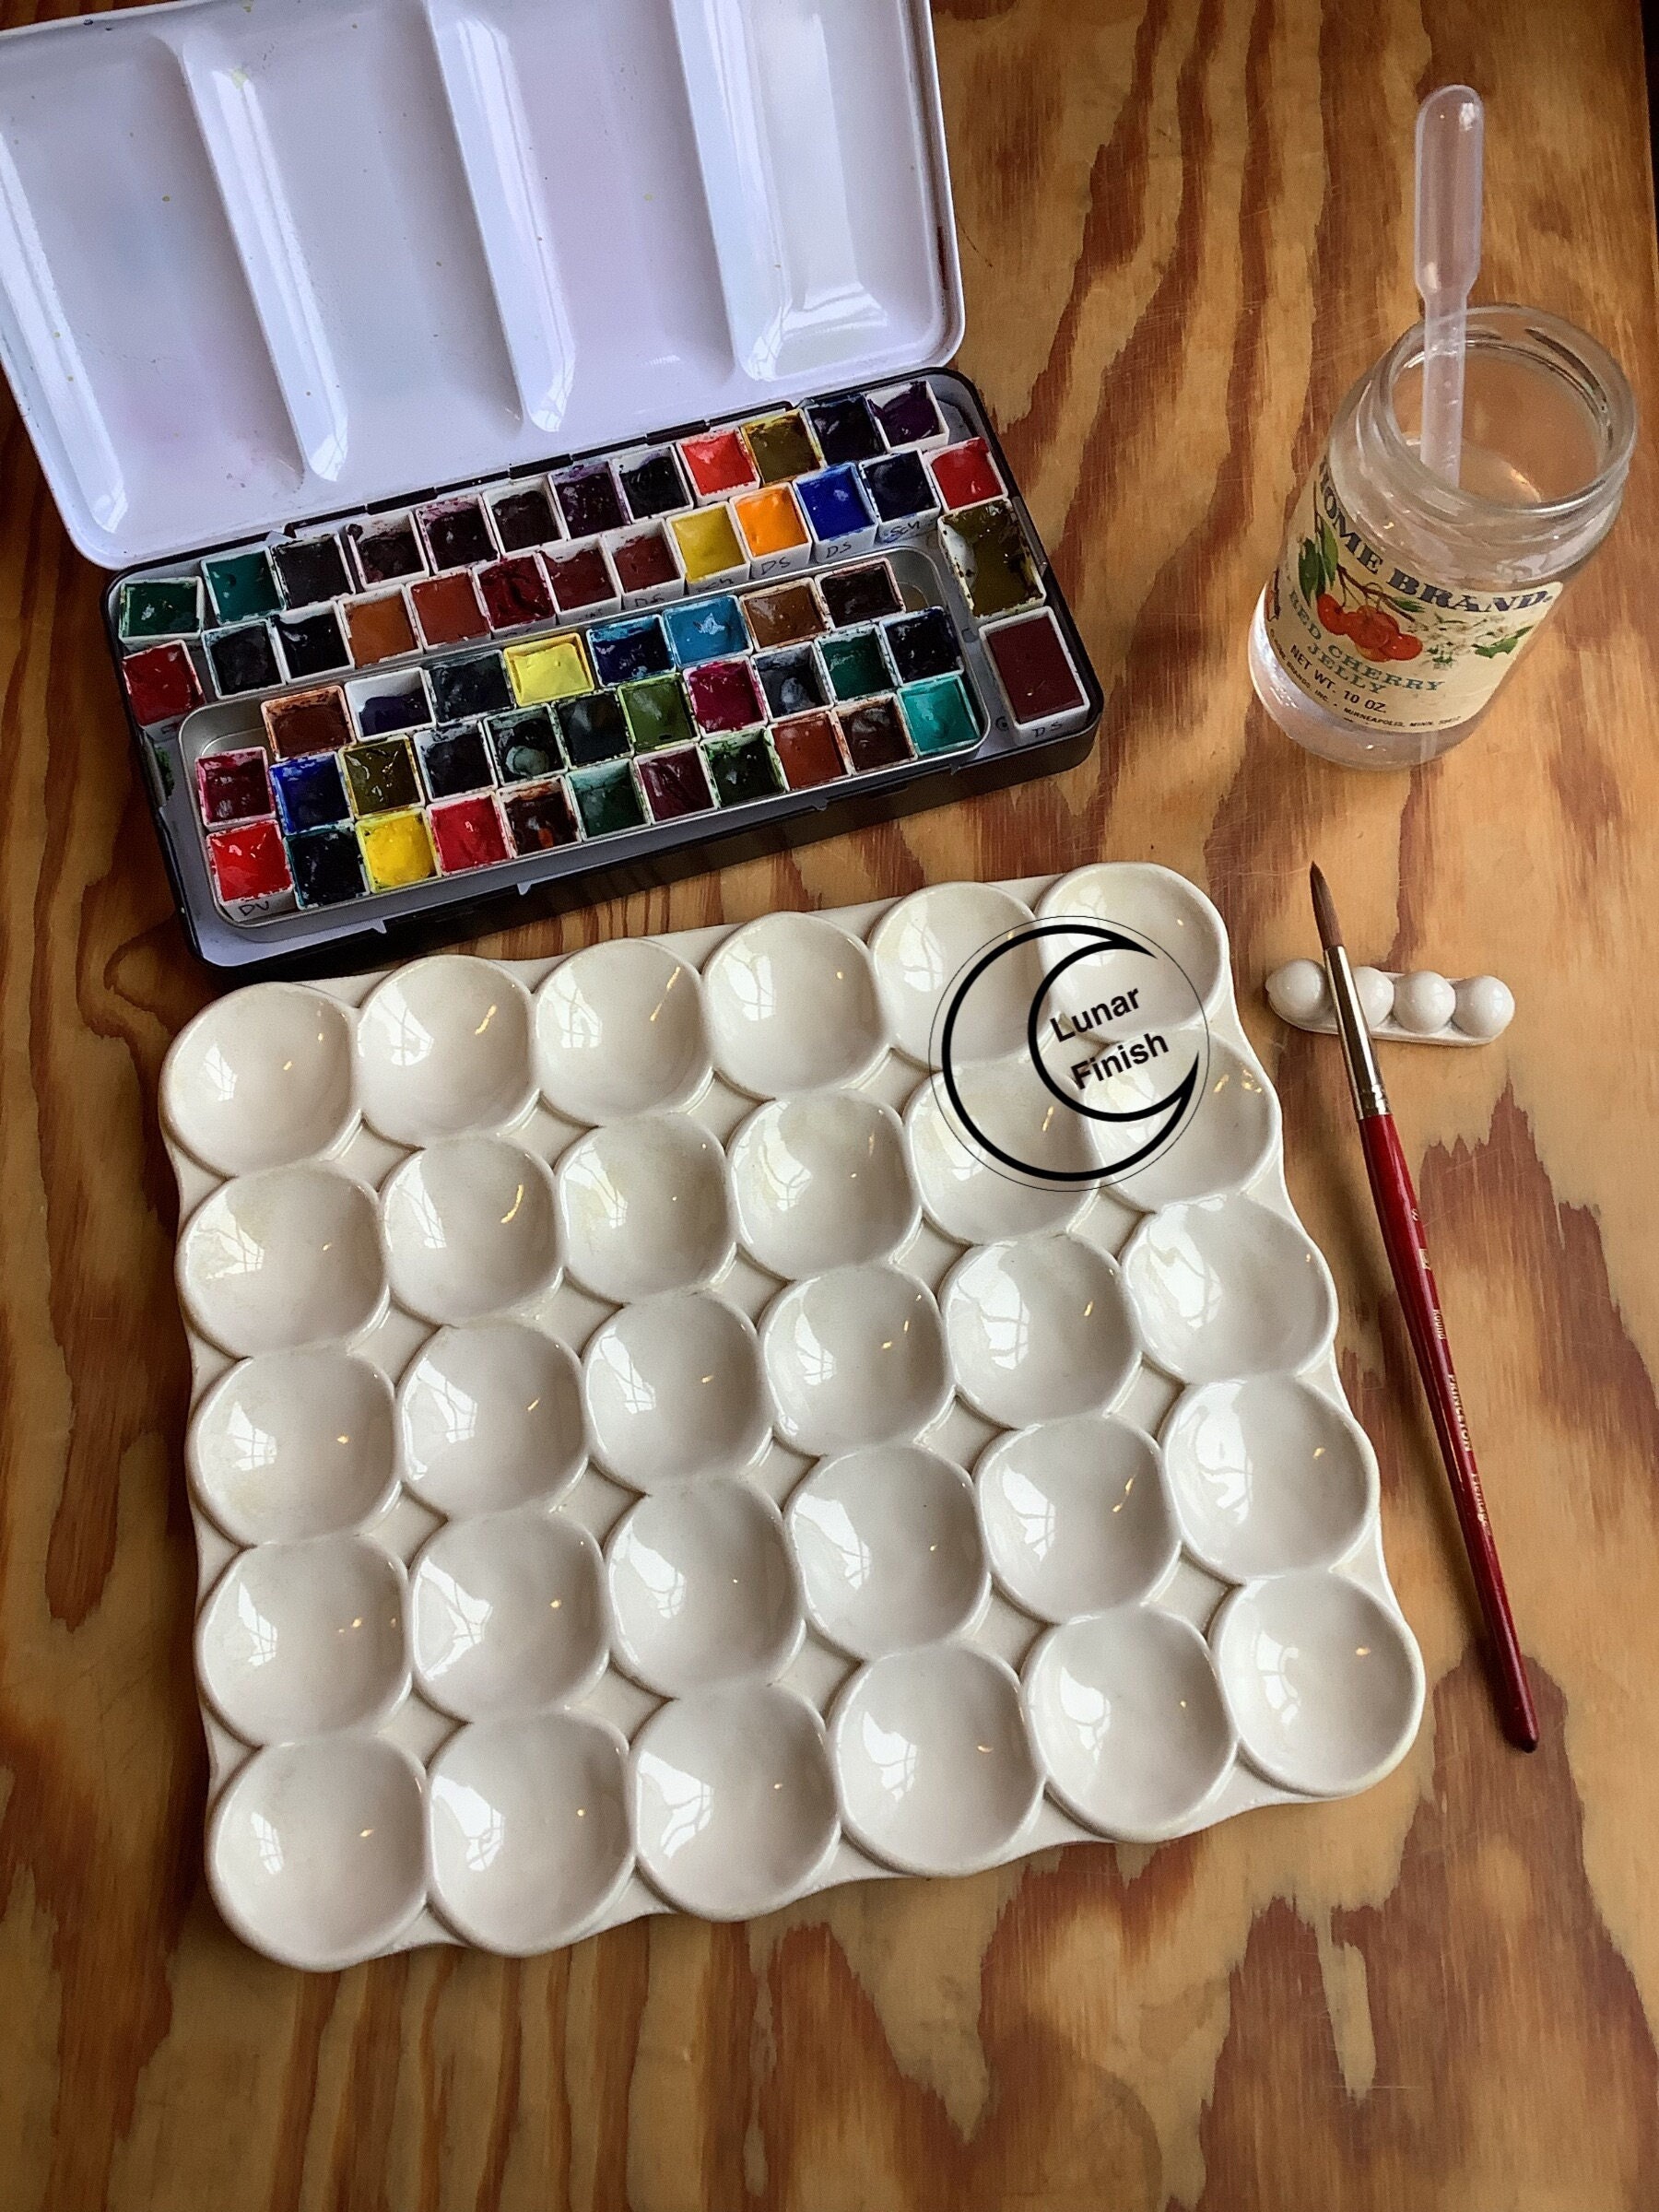 5 Well Small Ceramic Mixing Palette With Flat Area. Lunar Finish. Medium  Wells for Mixing Watercolor, Gouache, Ink, Acrylic, and Oil Paints. 